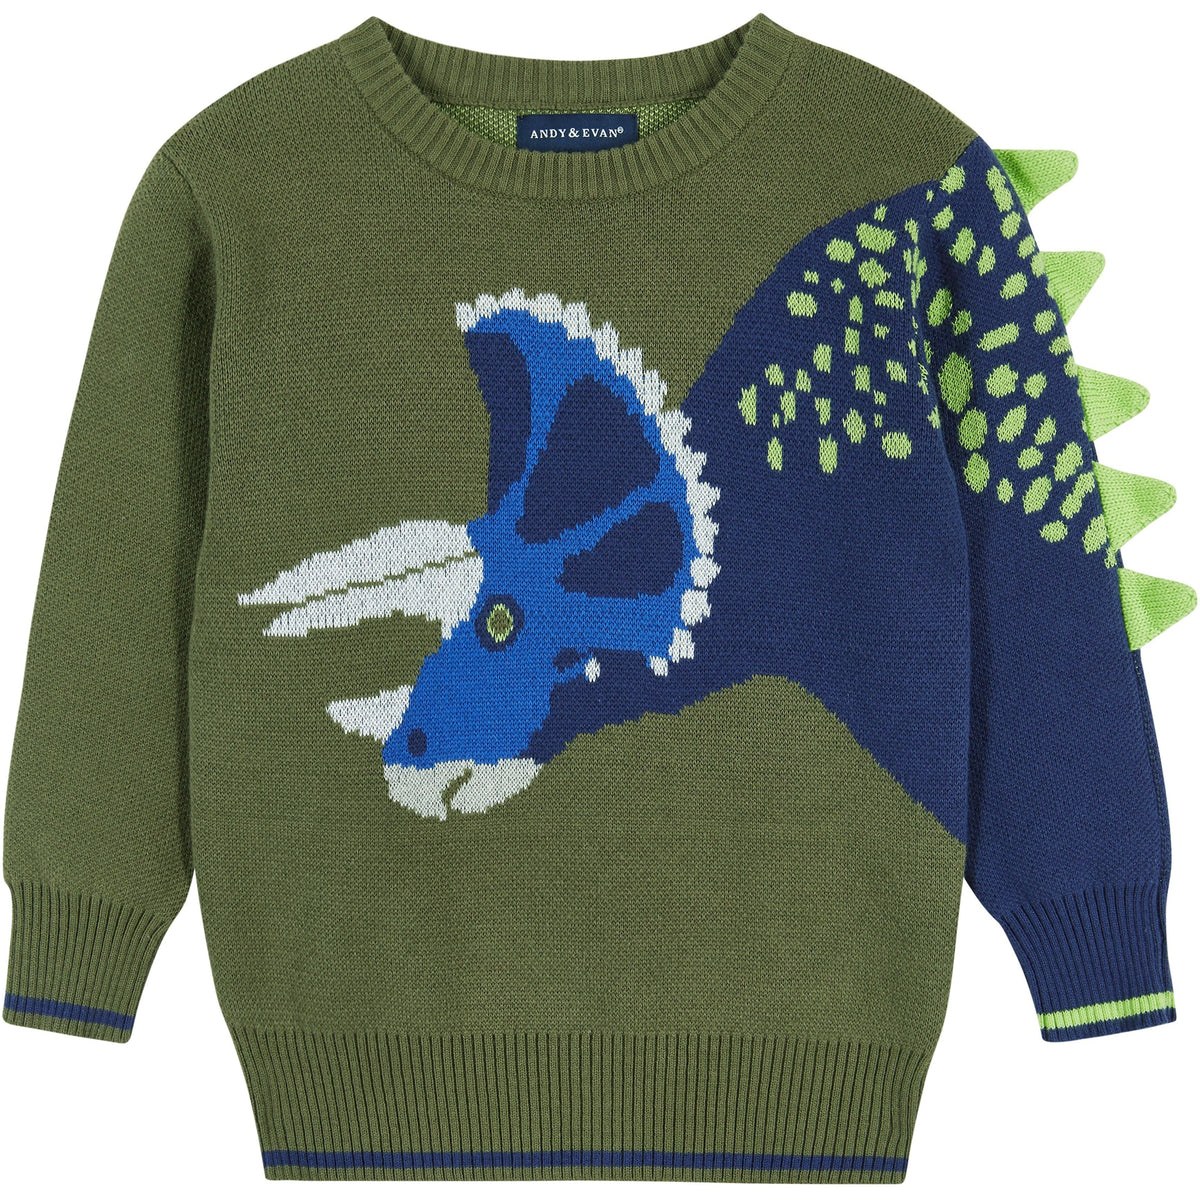 Andy & Evan Olive Triceratops Intarsia Sweater